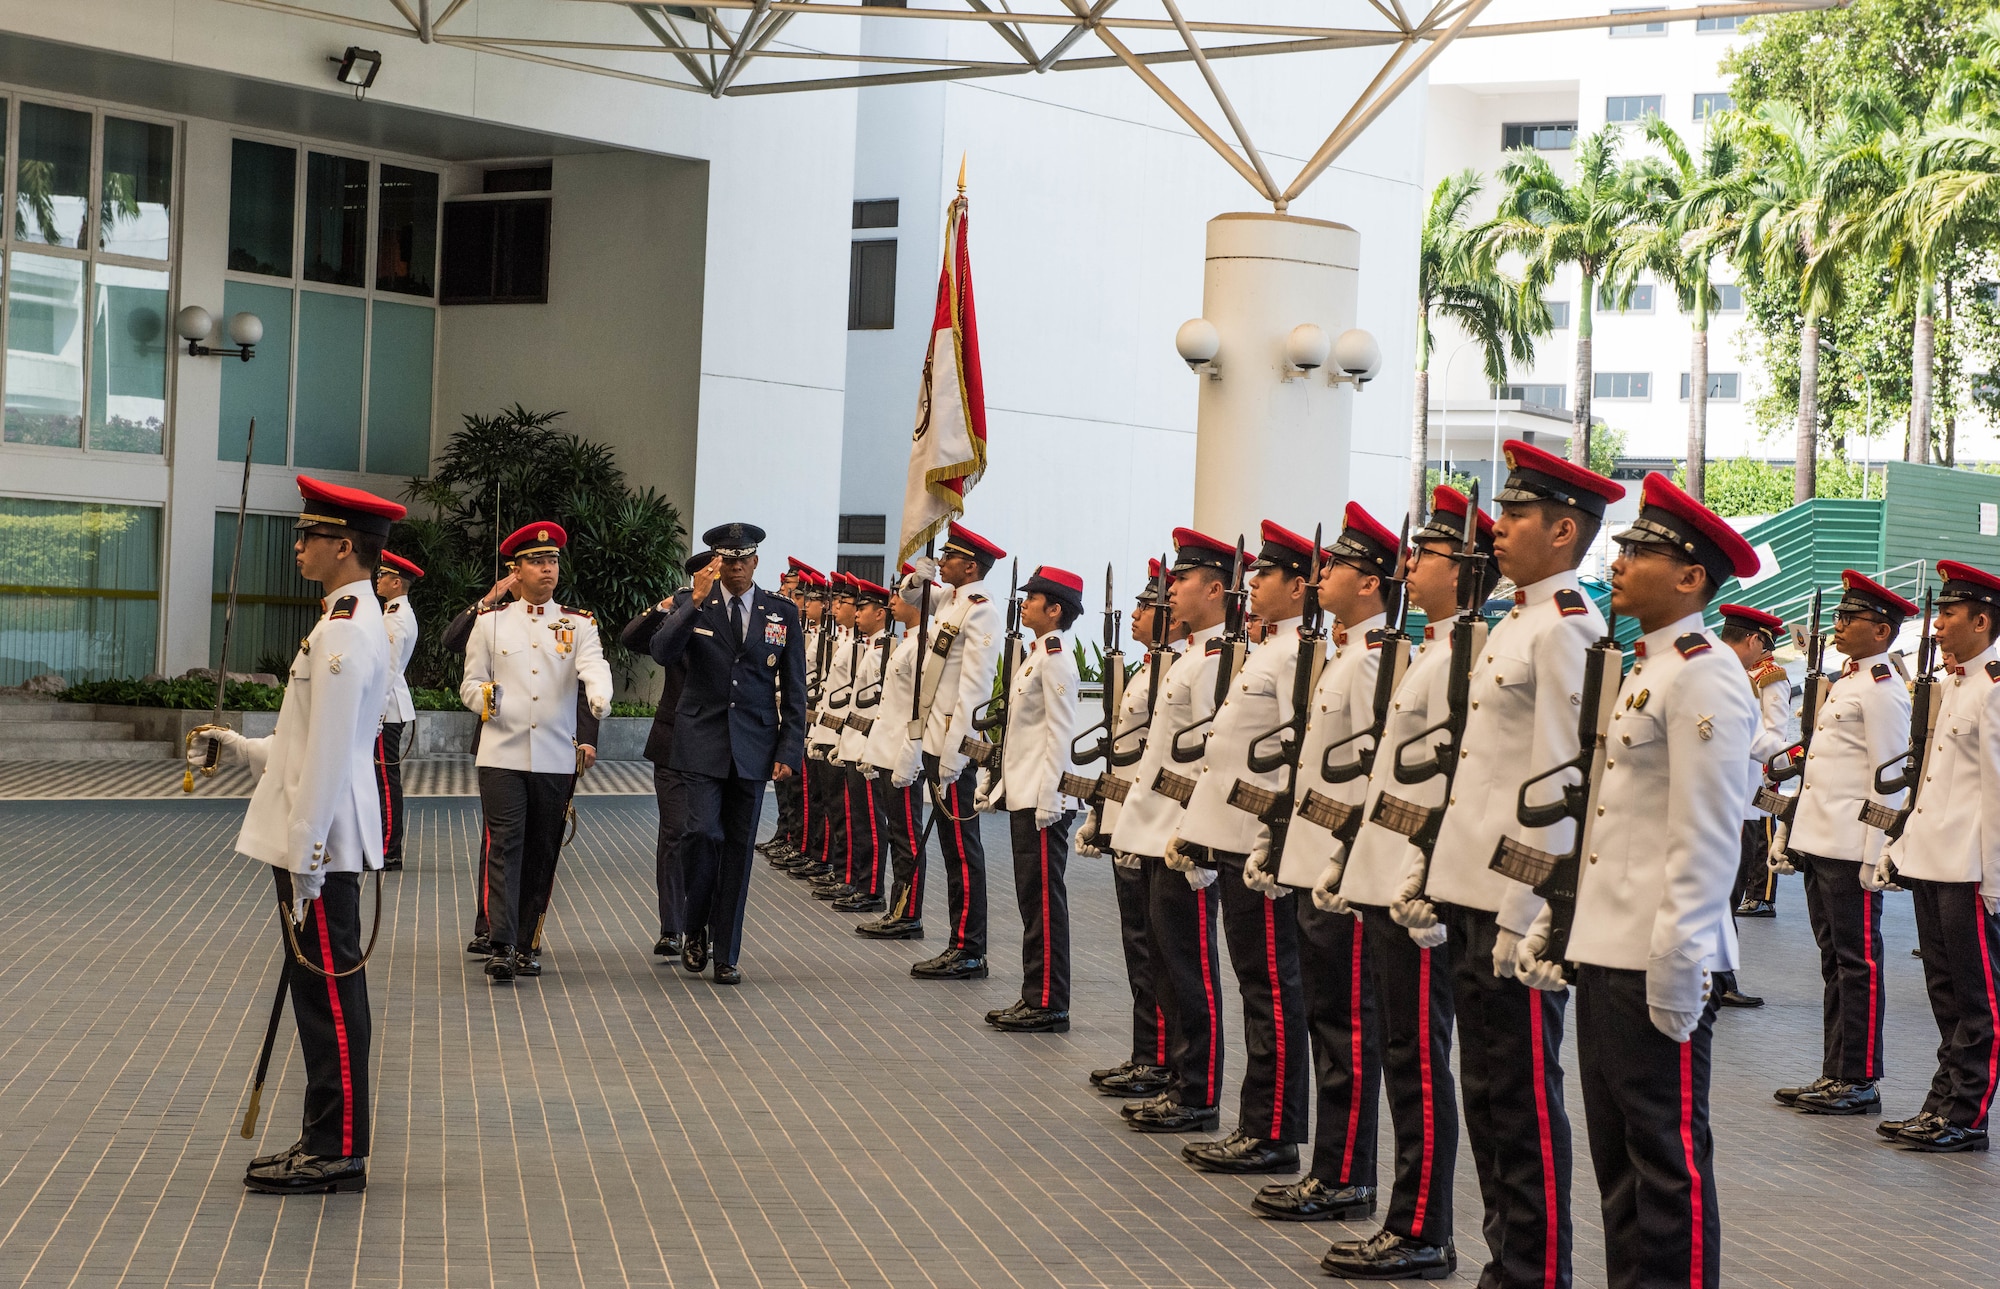 U.S. Air Force Gen. CQ Brown, Jr., Pacific Air Forces commander, salutes during the Guard of Honor at the Ministry of Defence, Singapore, March 20, 2019.